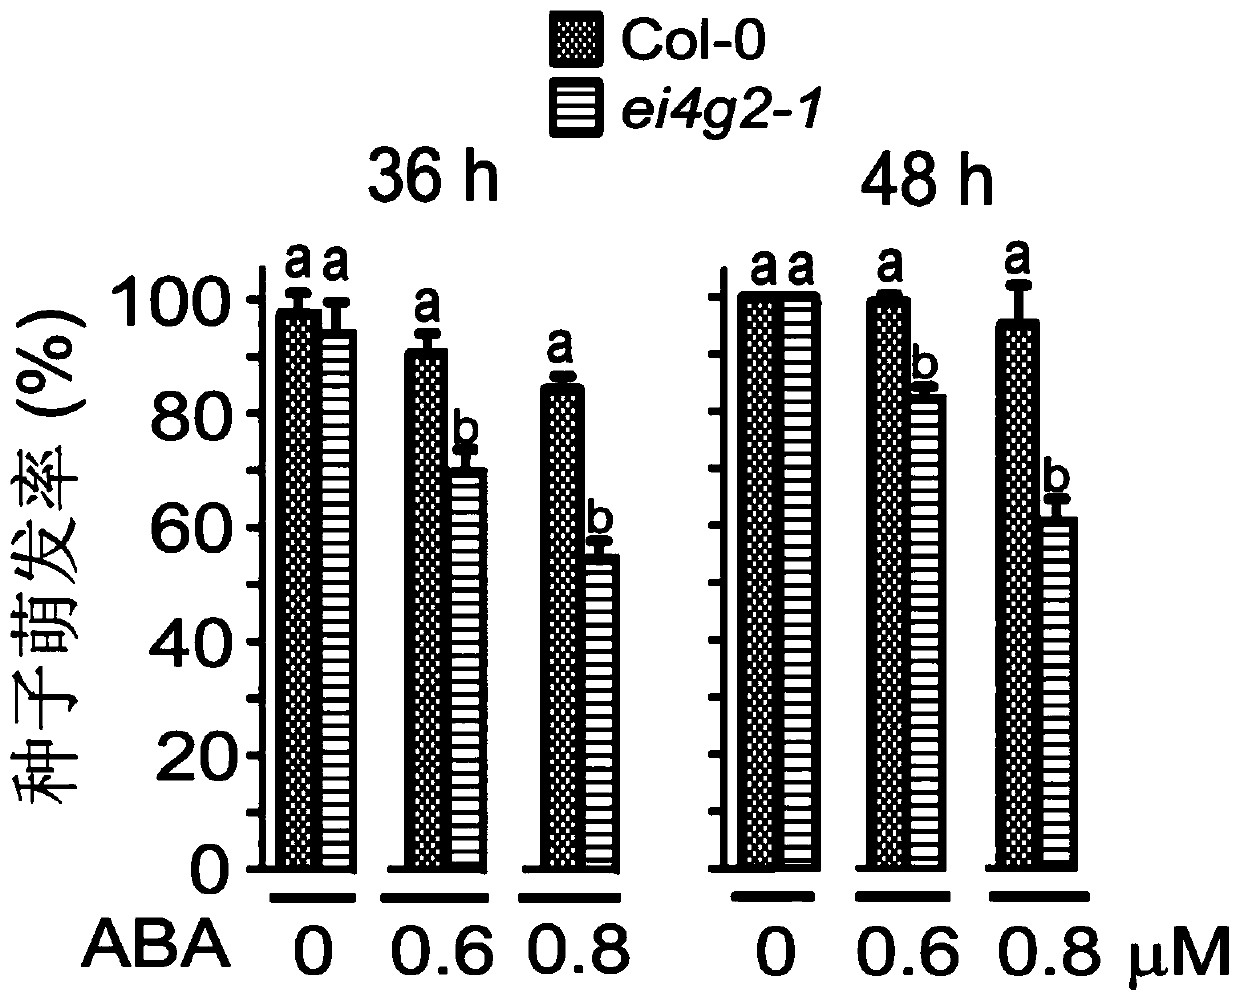 Application of eIFiso4G2 protein for regulating tolerance of plants to ABA